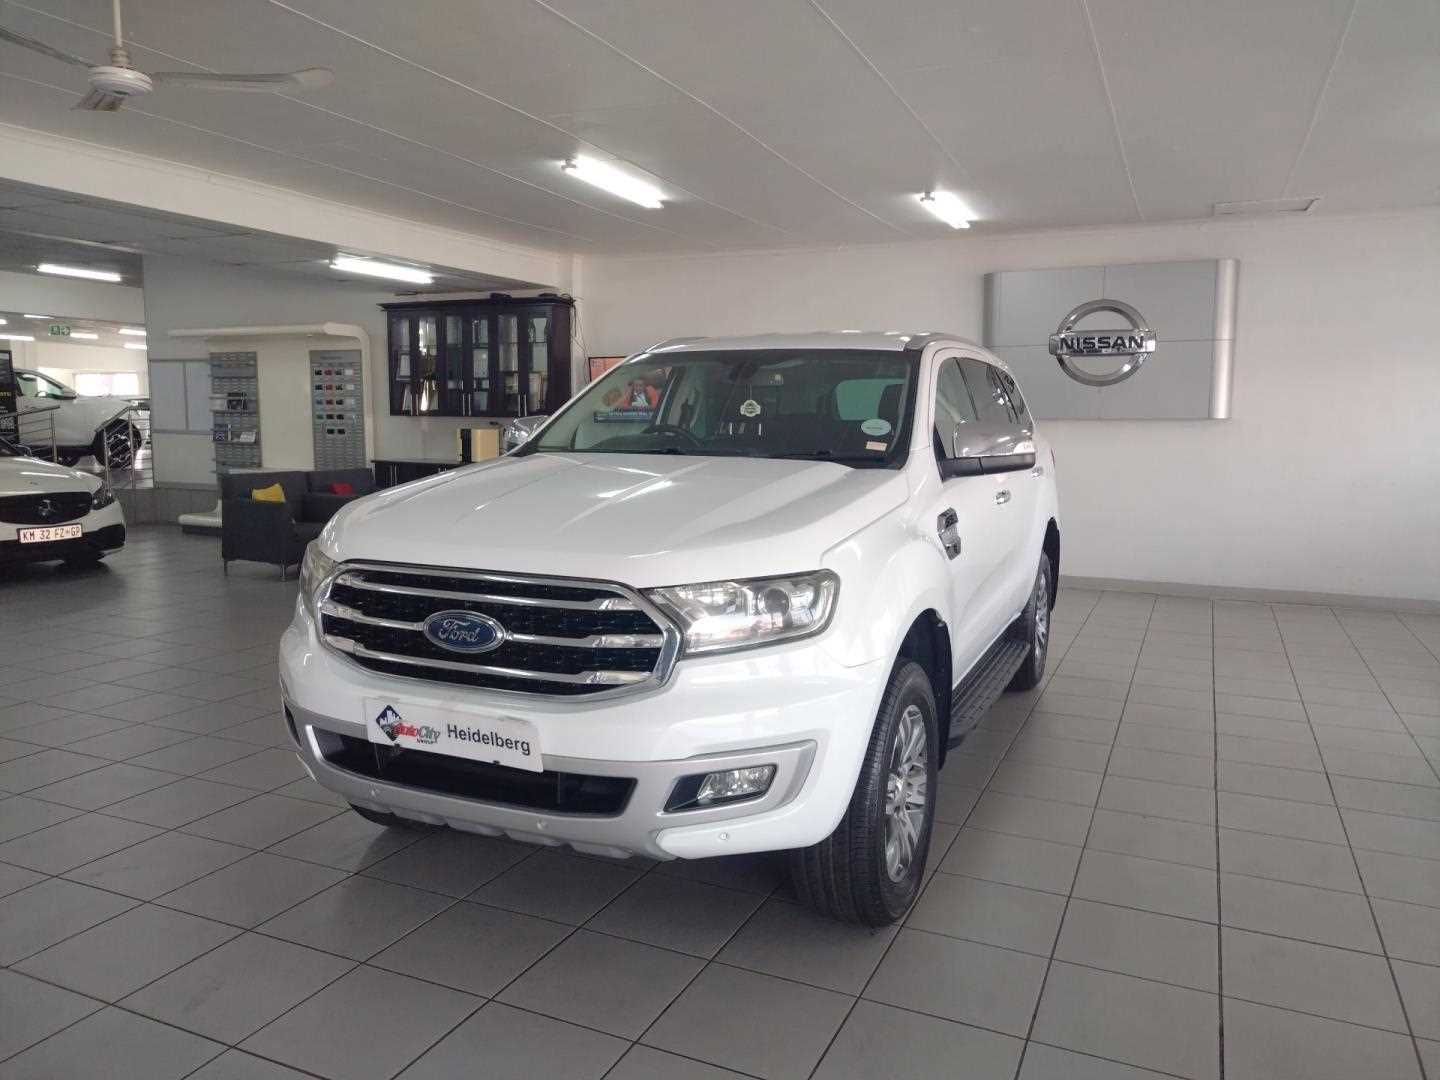 2020 Ford Everest MY20.75 3.2 Tdci Xlt 4X4 At for sale - 337751